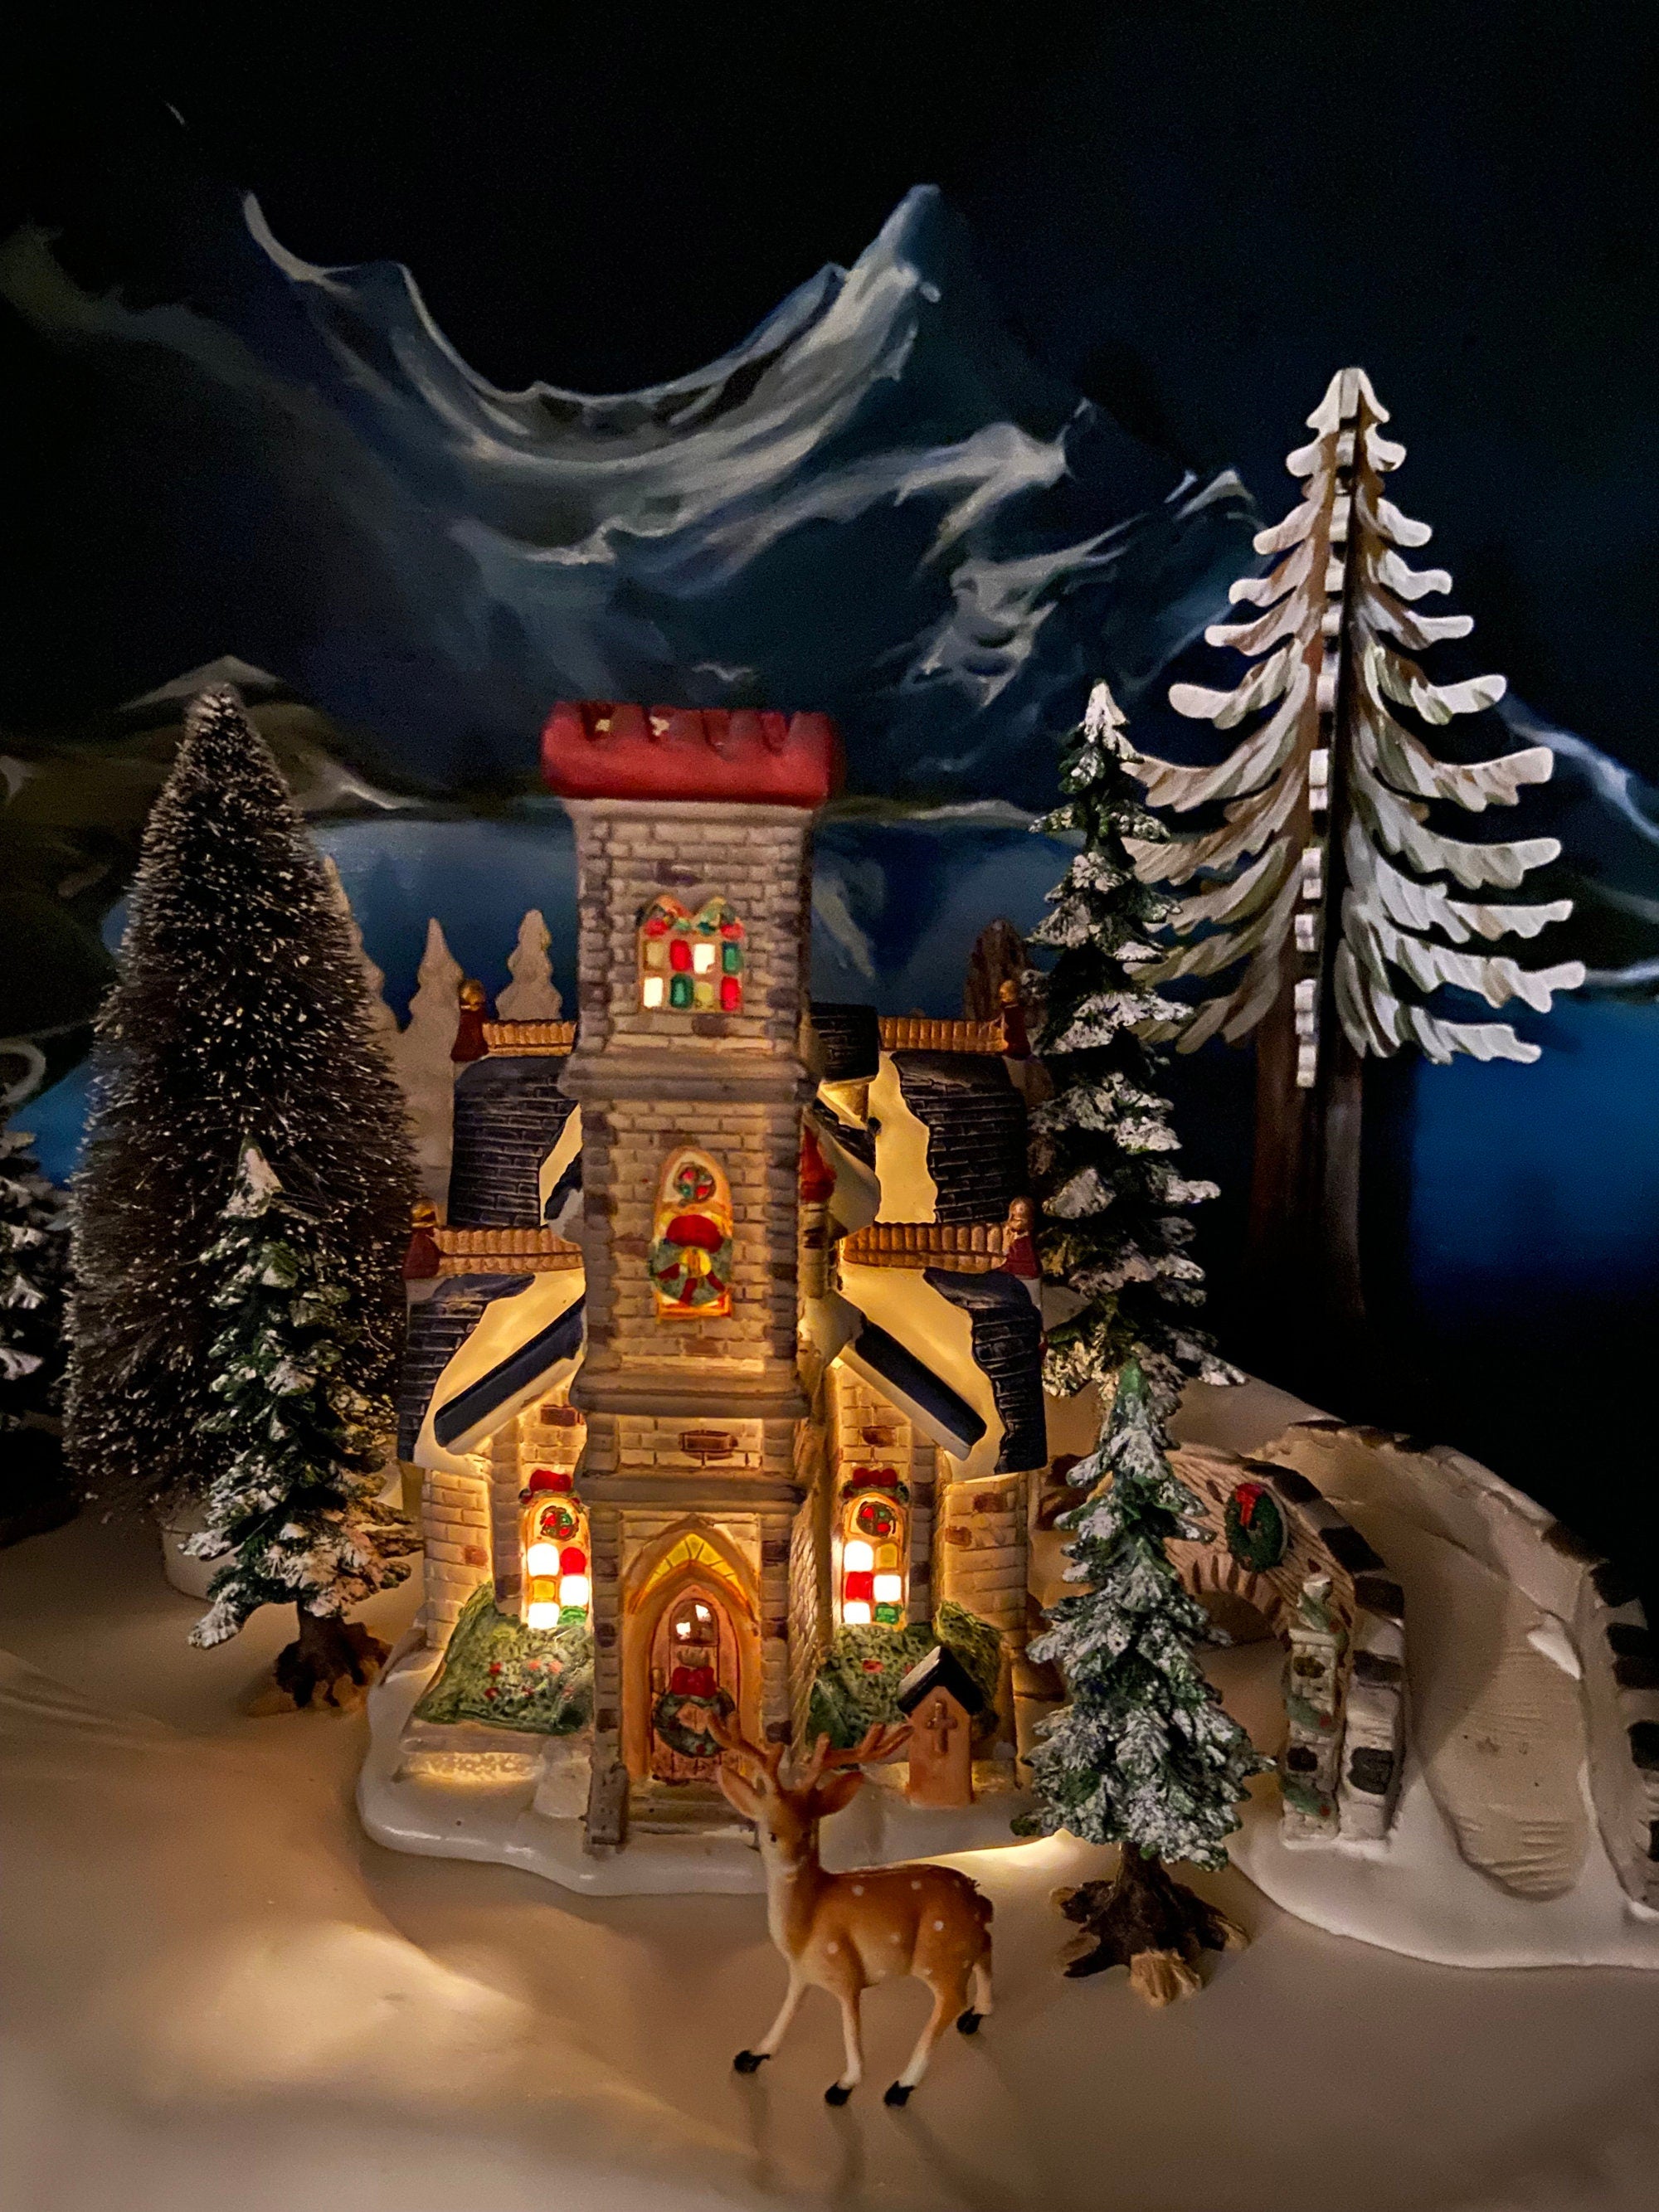 Christmas Village Accessories by O'Well. Illuminated Curiosity Shop. P – Anything Discovered